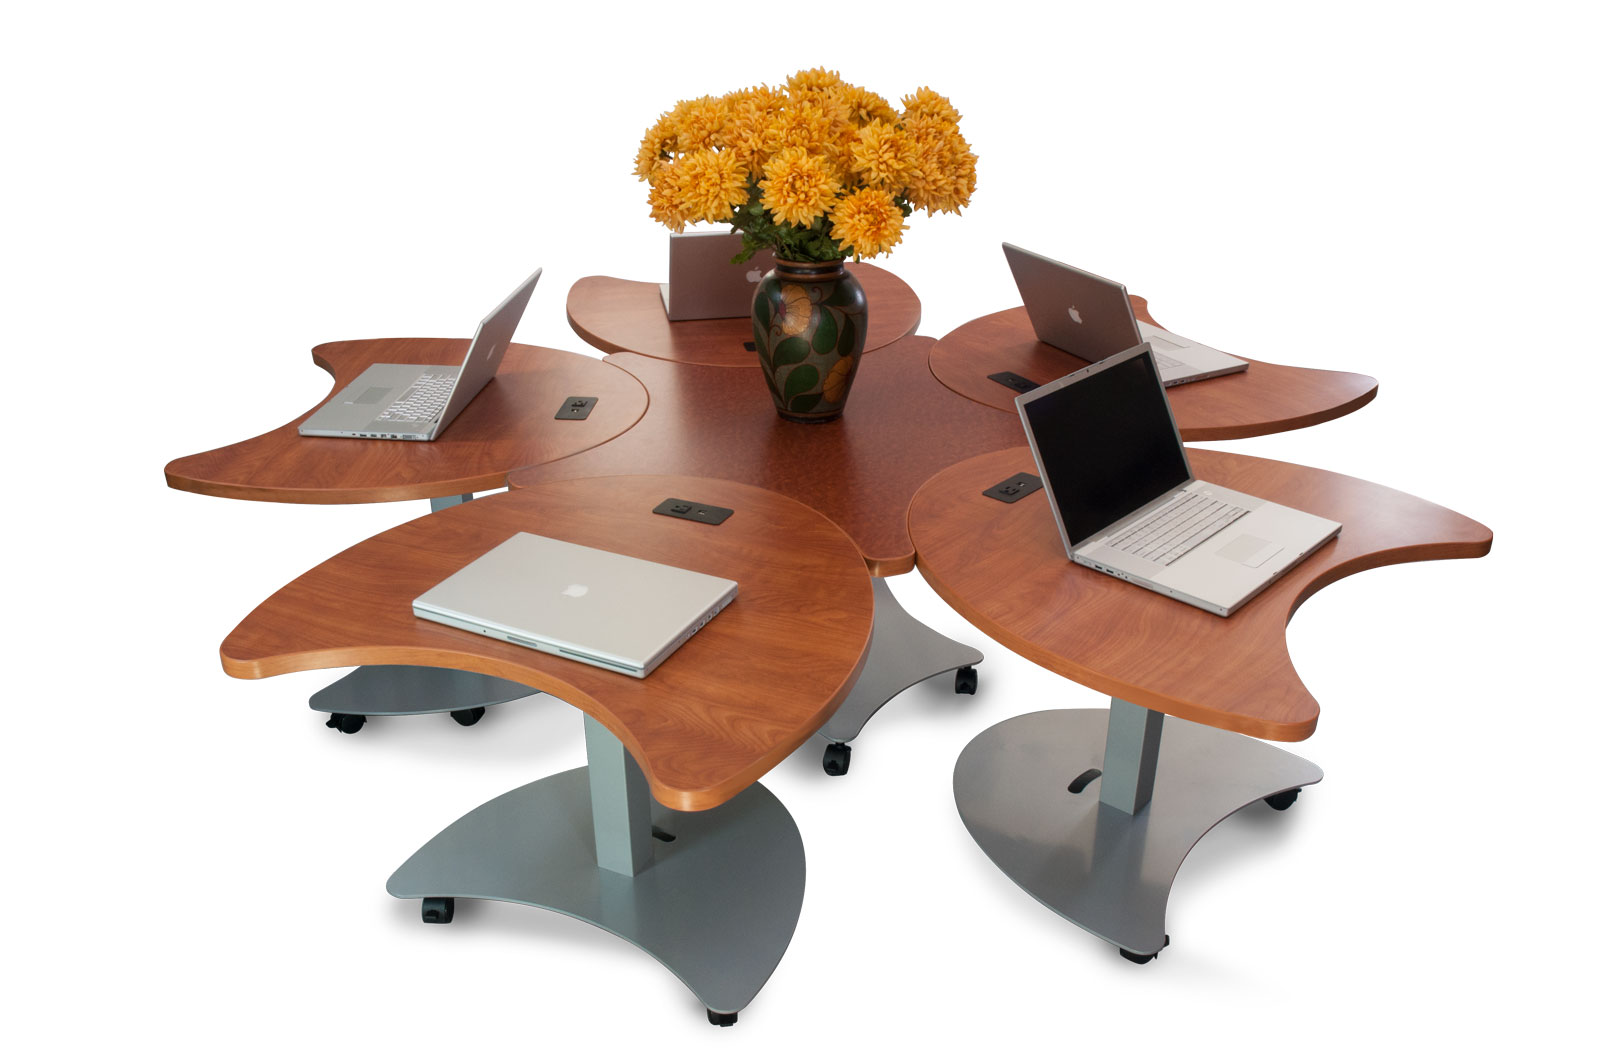 The Quark2 Qstar5 conference table system